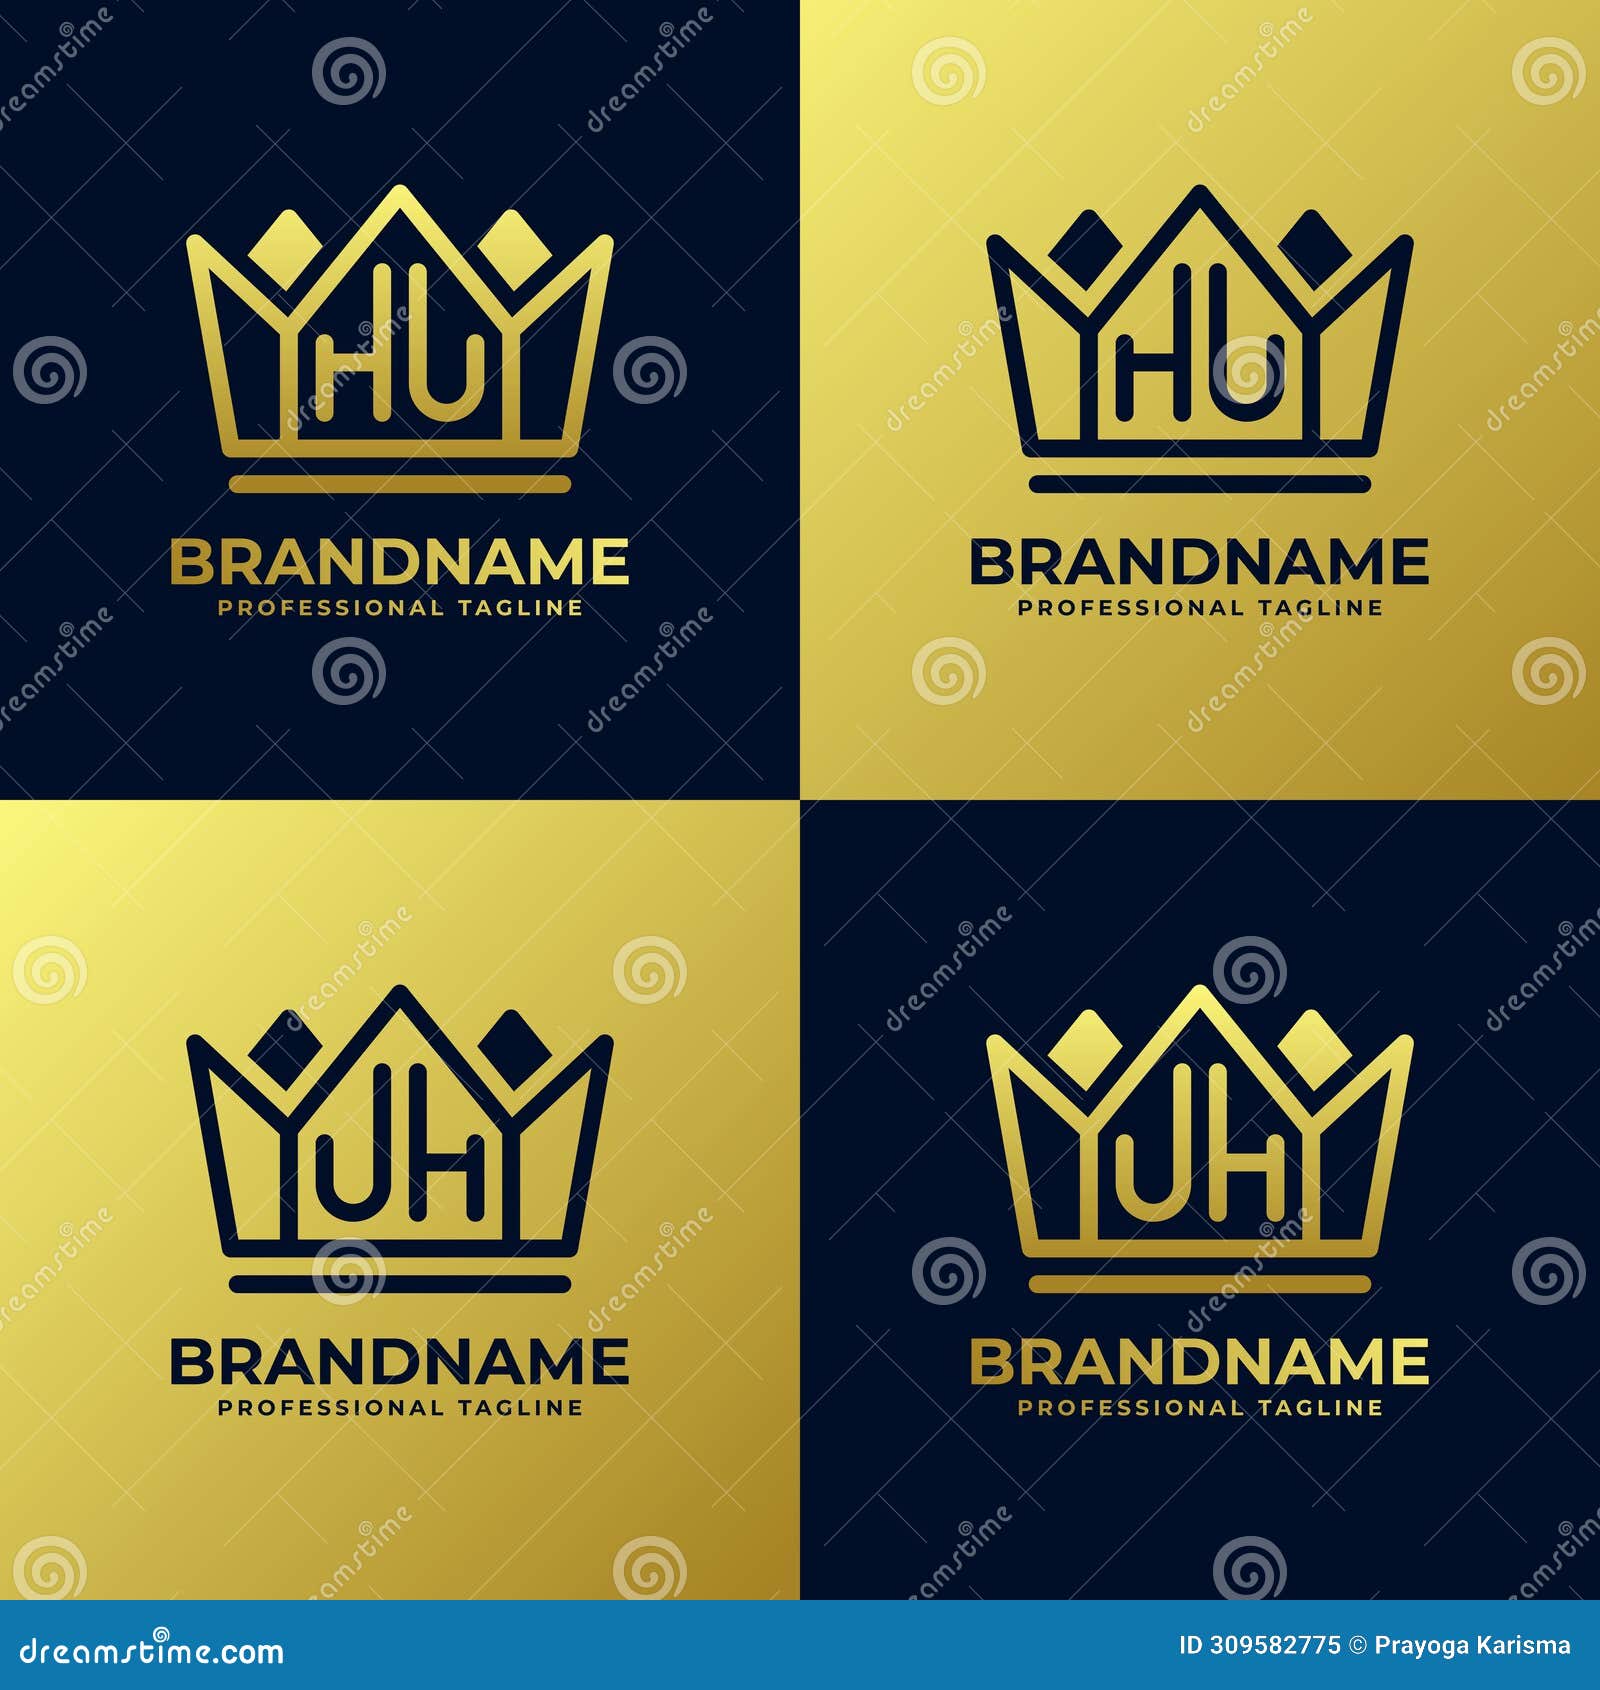 letters hu and uh home king logo set, suitable for business with hu and uh initials